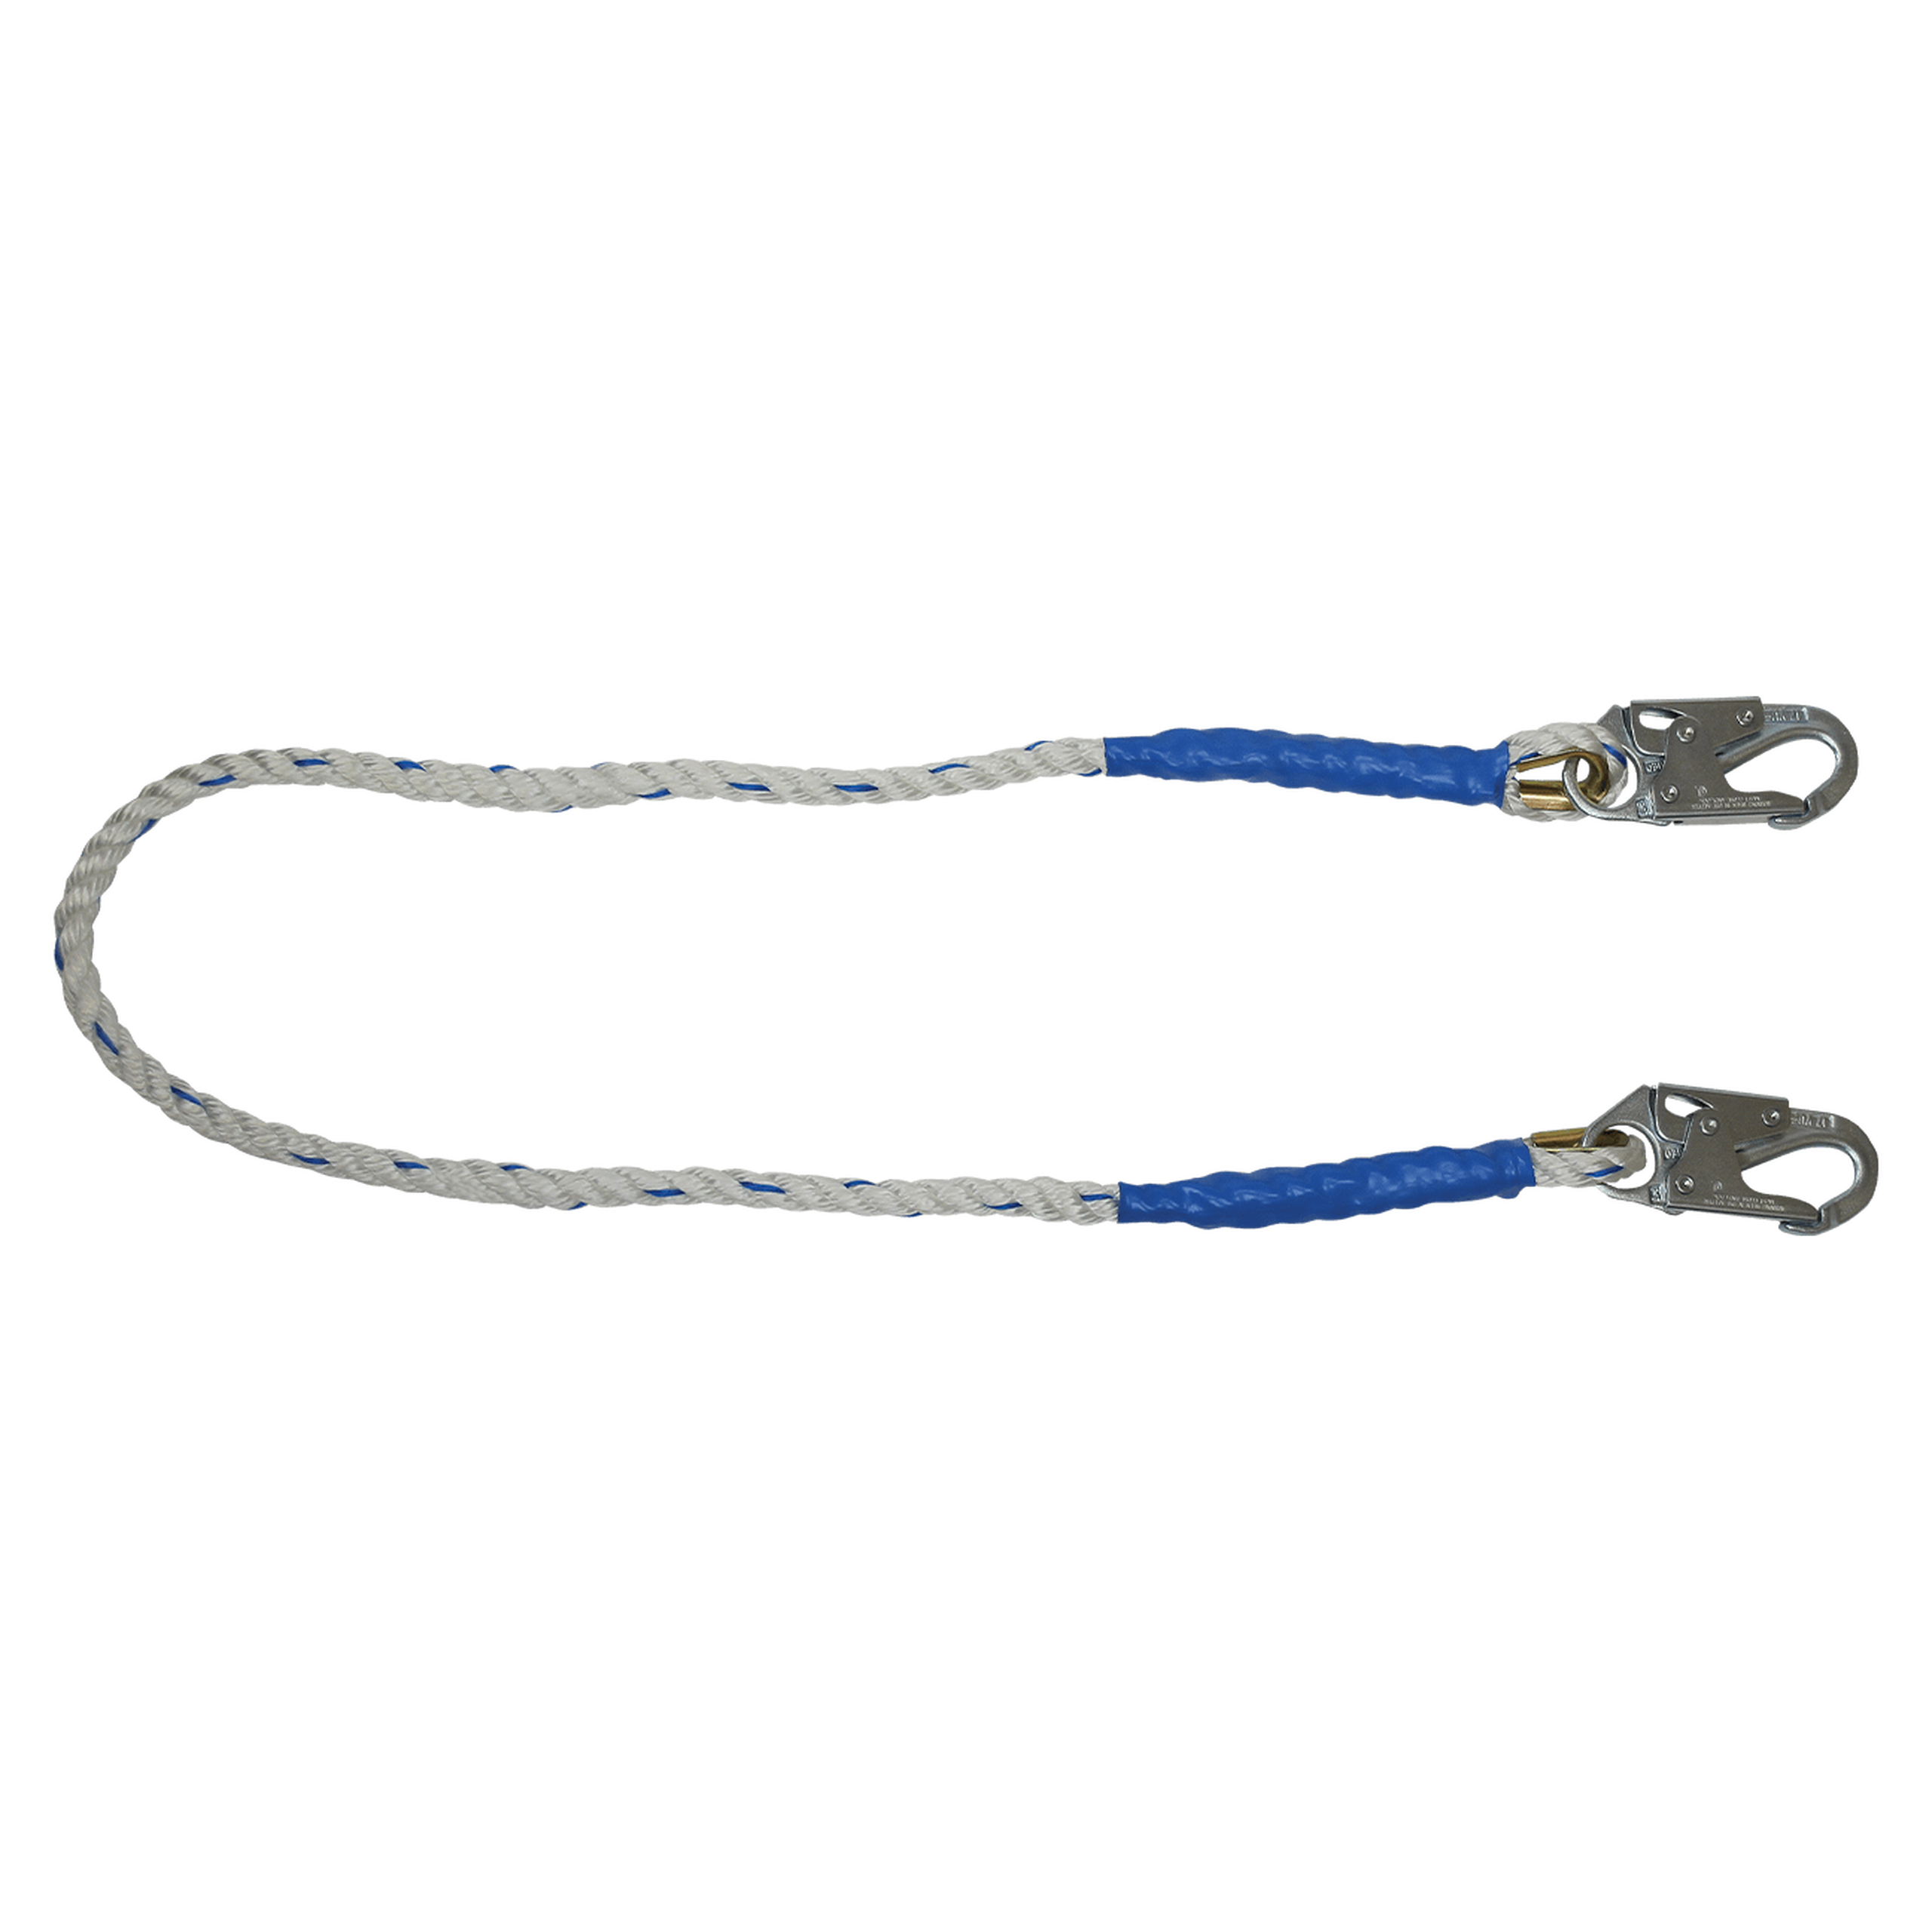 FallTech 8156 6' Rope Restraint Lanyard, Fixed-length with Steel Snap Hooks (each)